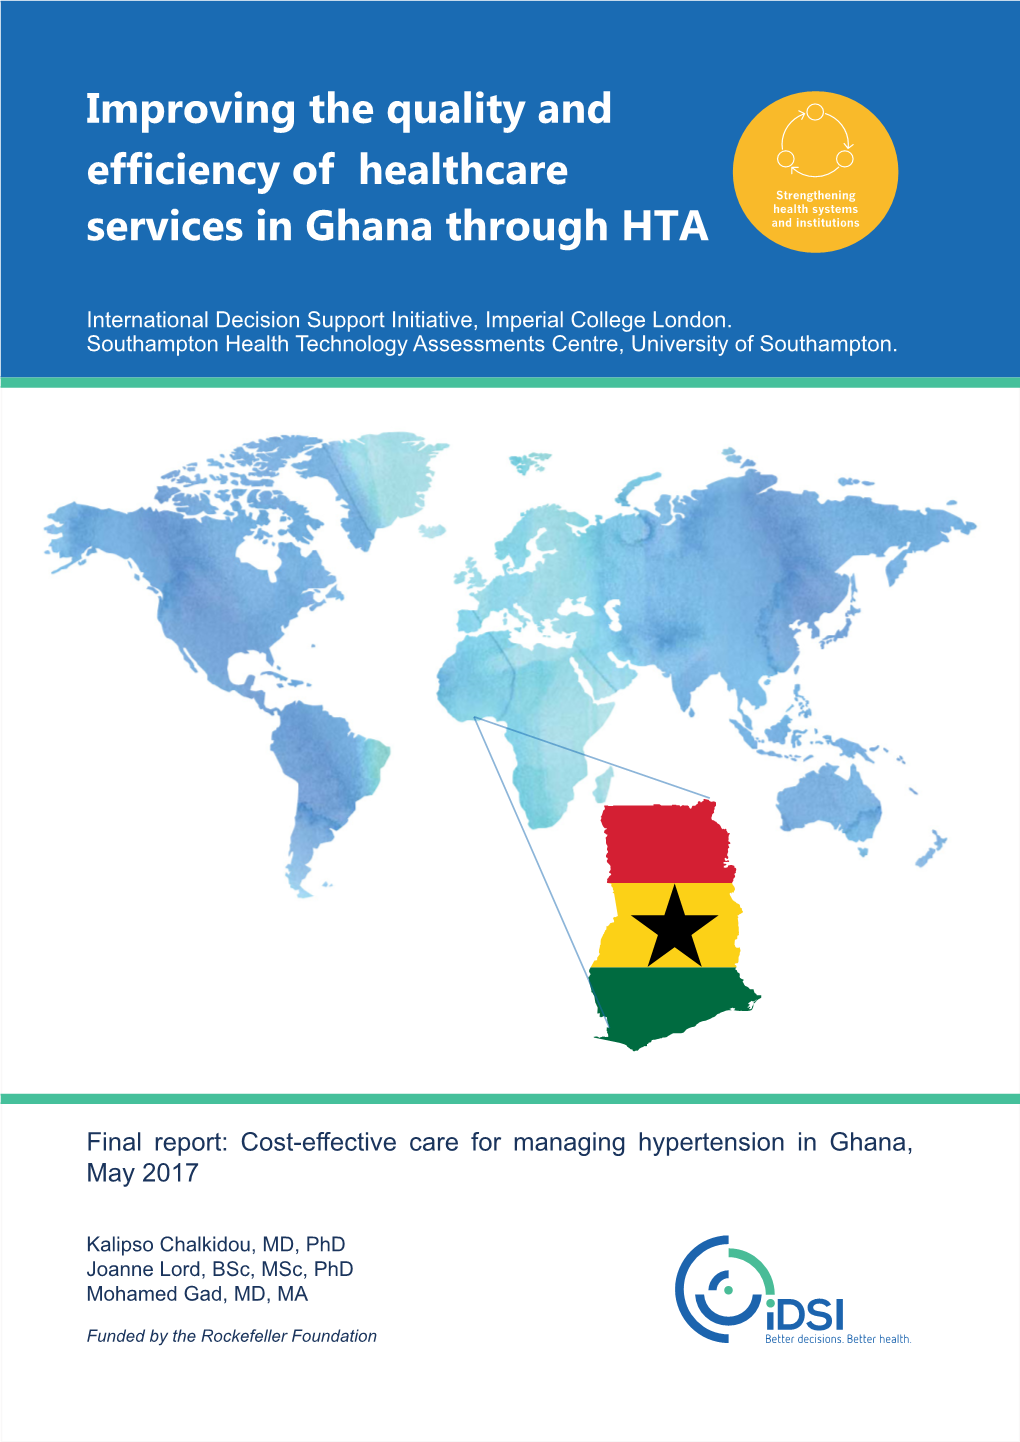 Improving the Quality and Efficiency of Healthcare Services in Ghana Through HTA